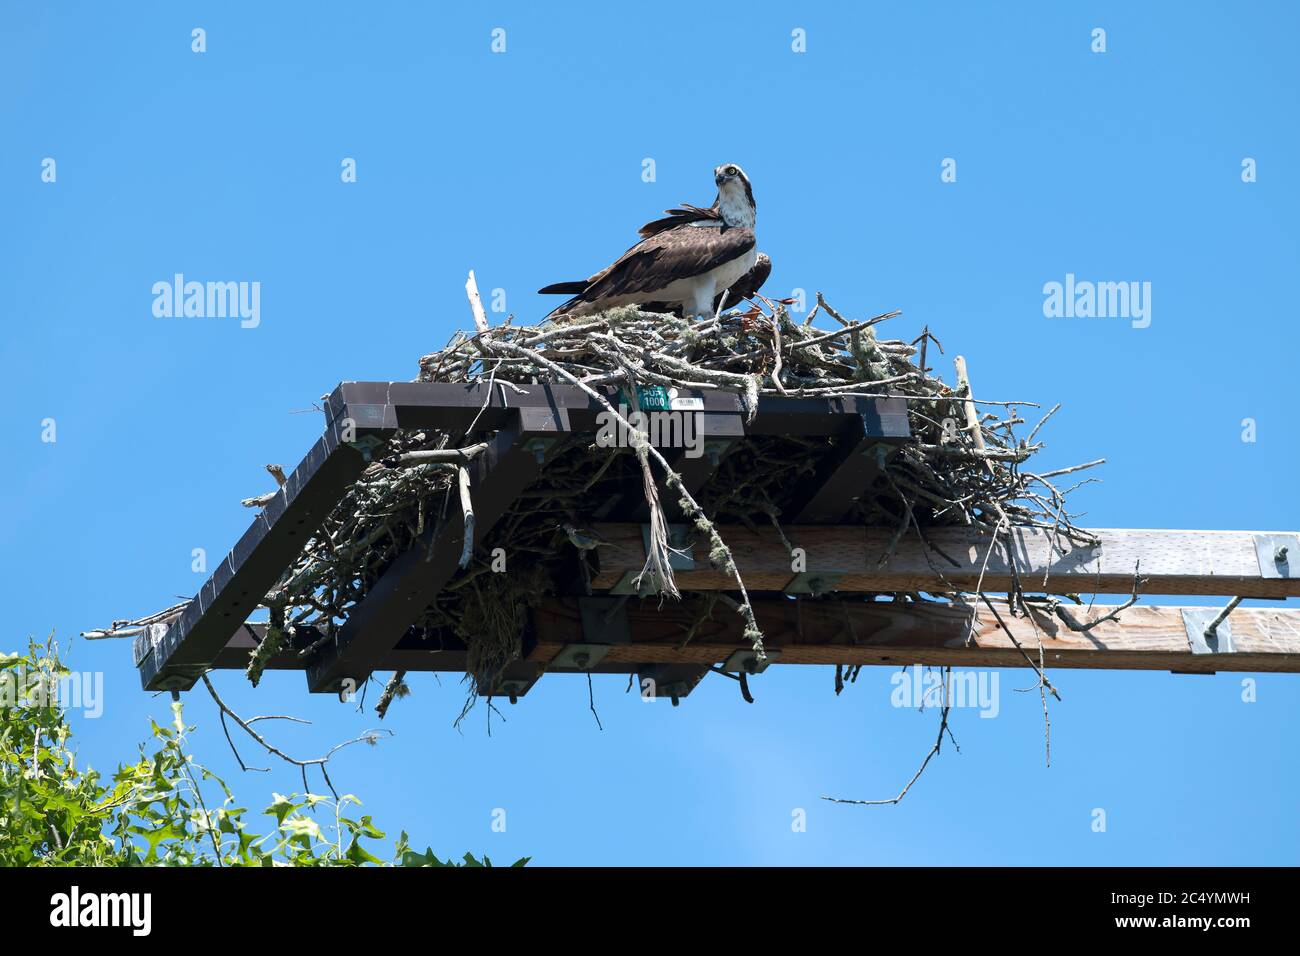 An Osprey (Pandion haliaetus) and her nest on a utility pole in Barnstable, Mass. on Cape Cod, USA Stock Photo